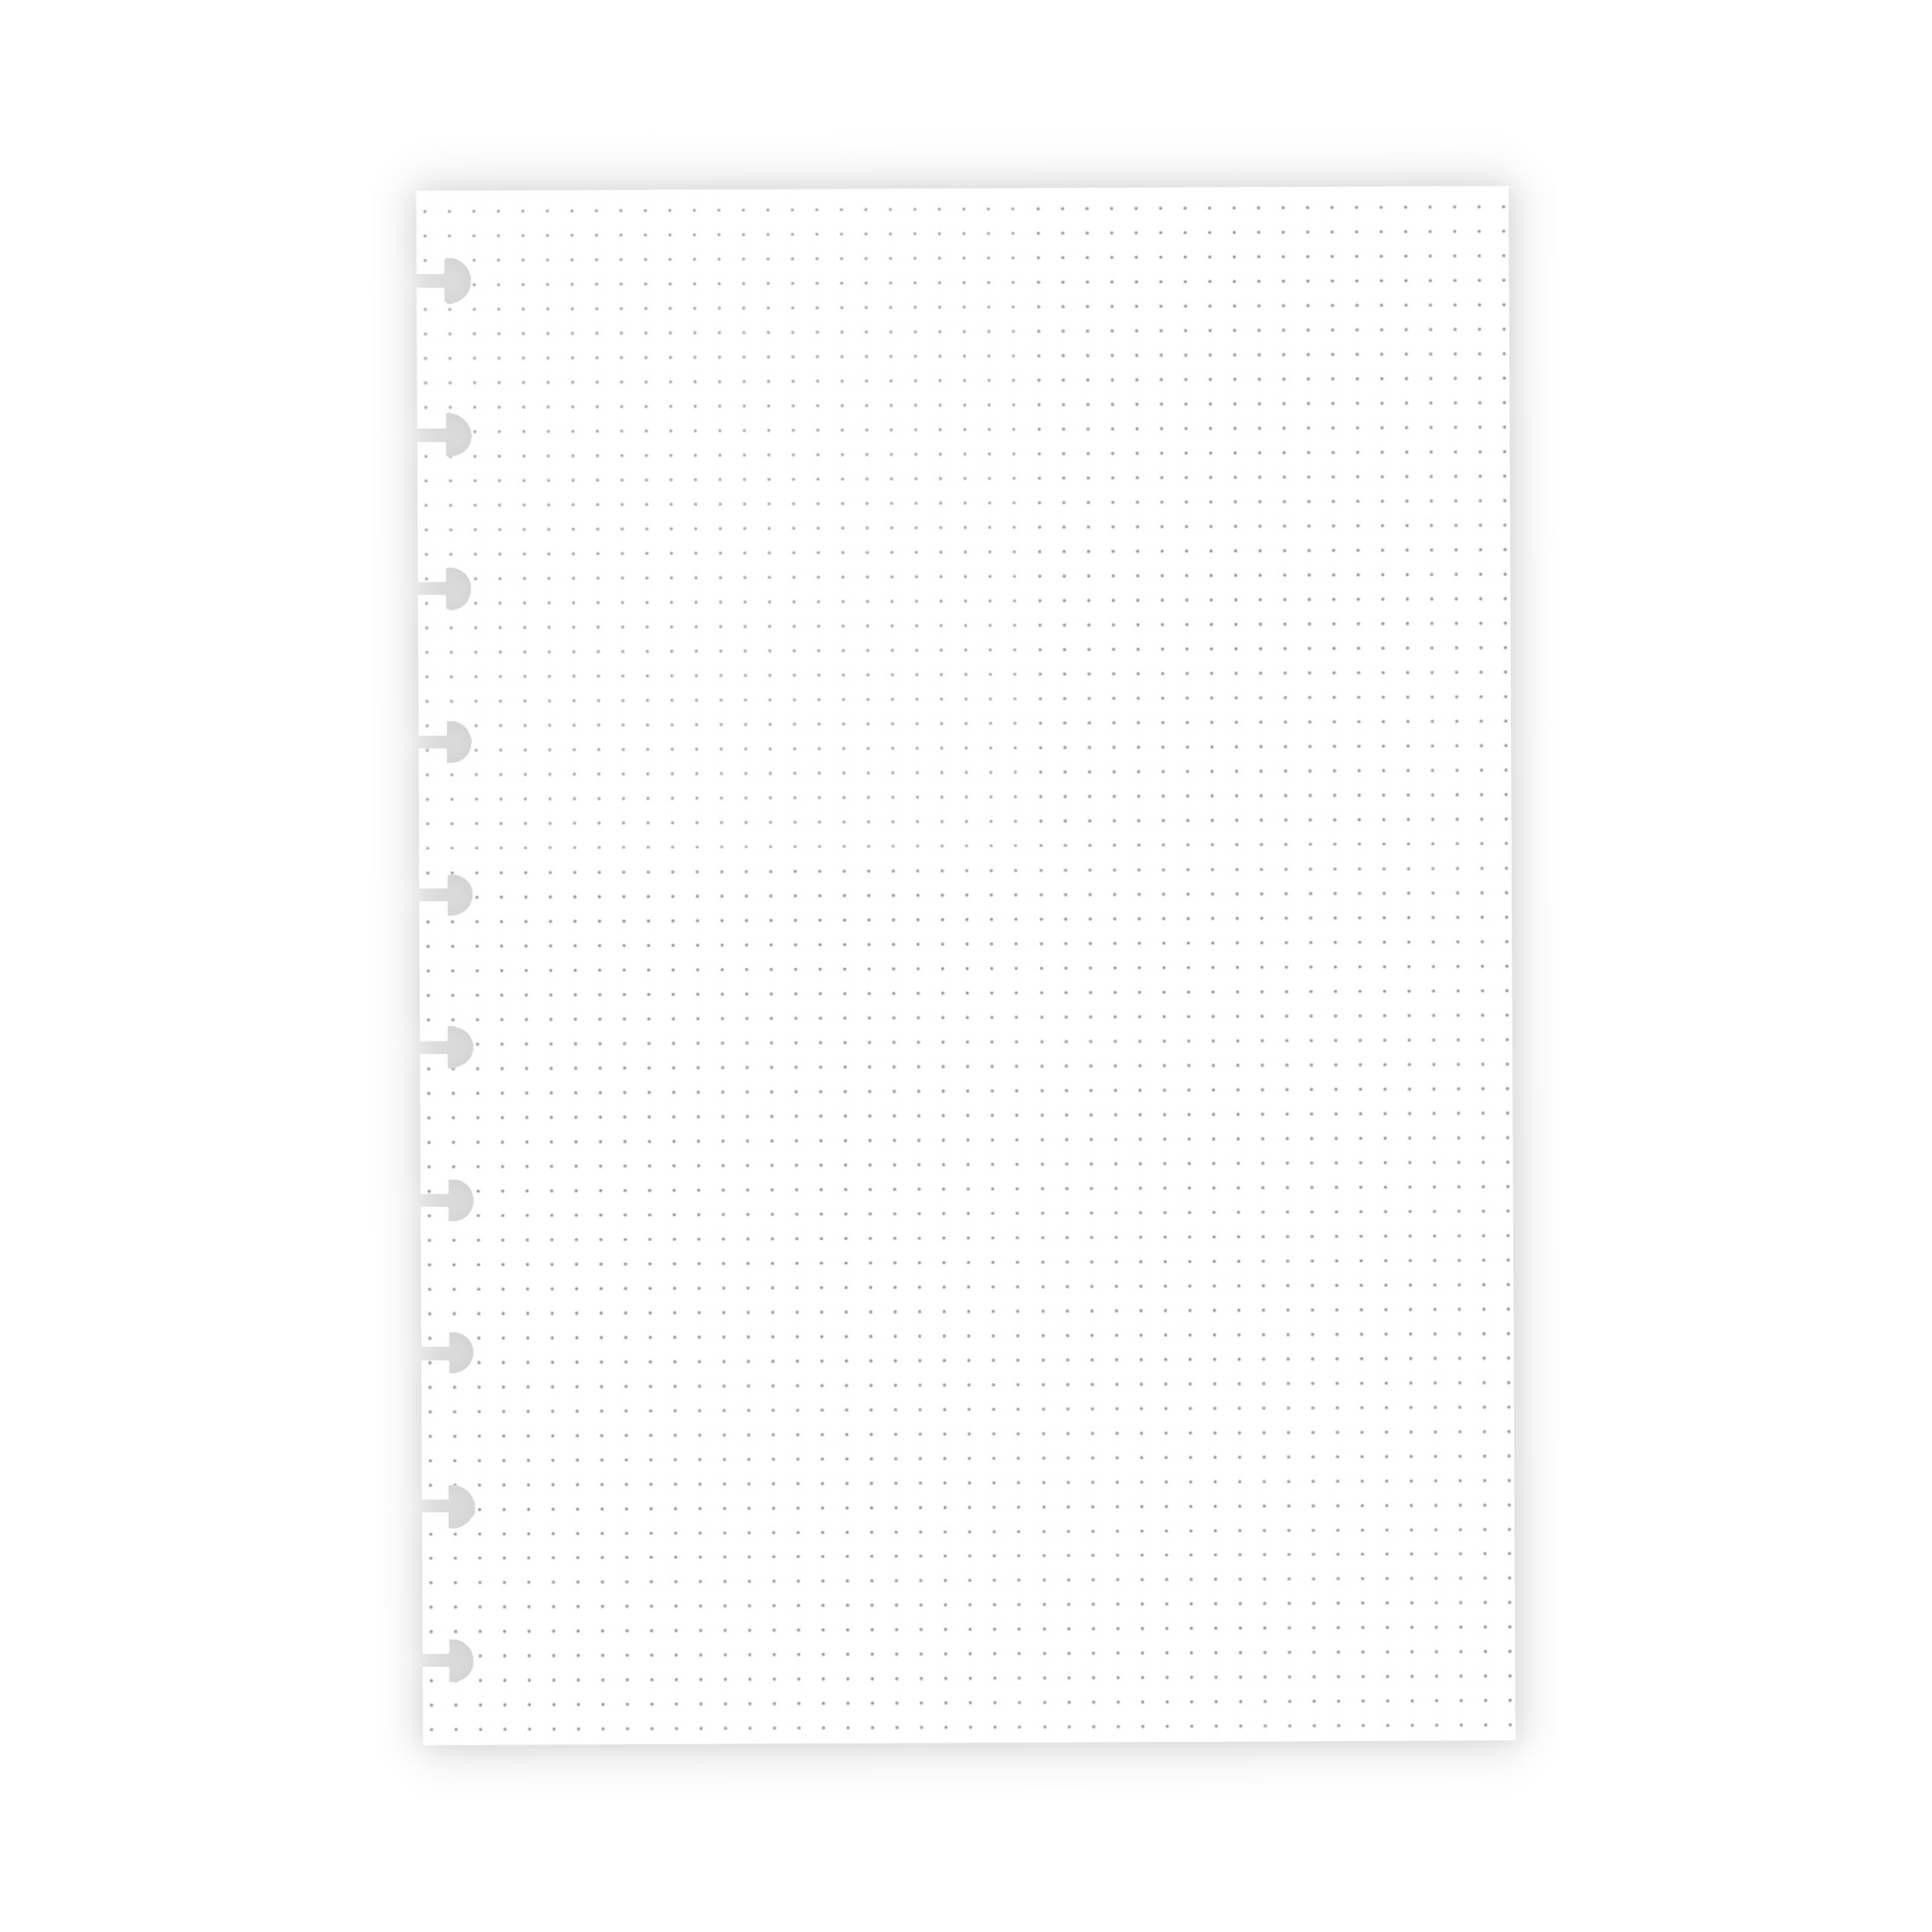 Disc-punched blank dot grid paper